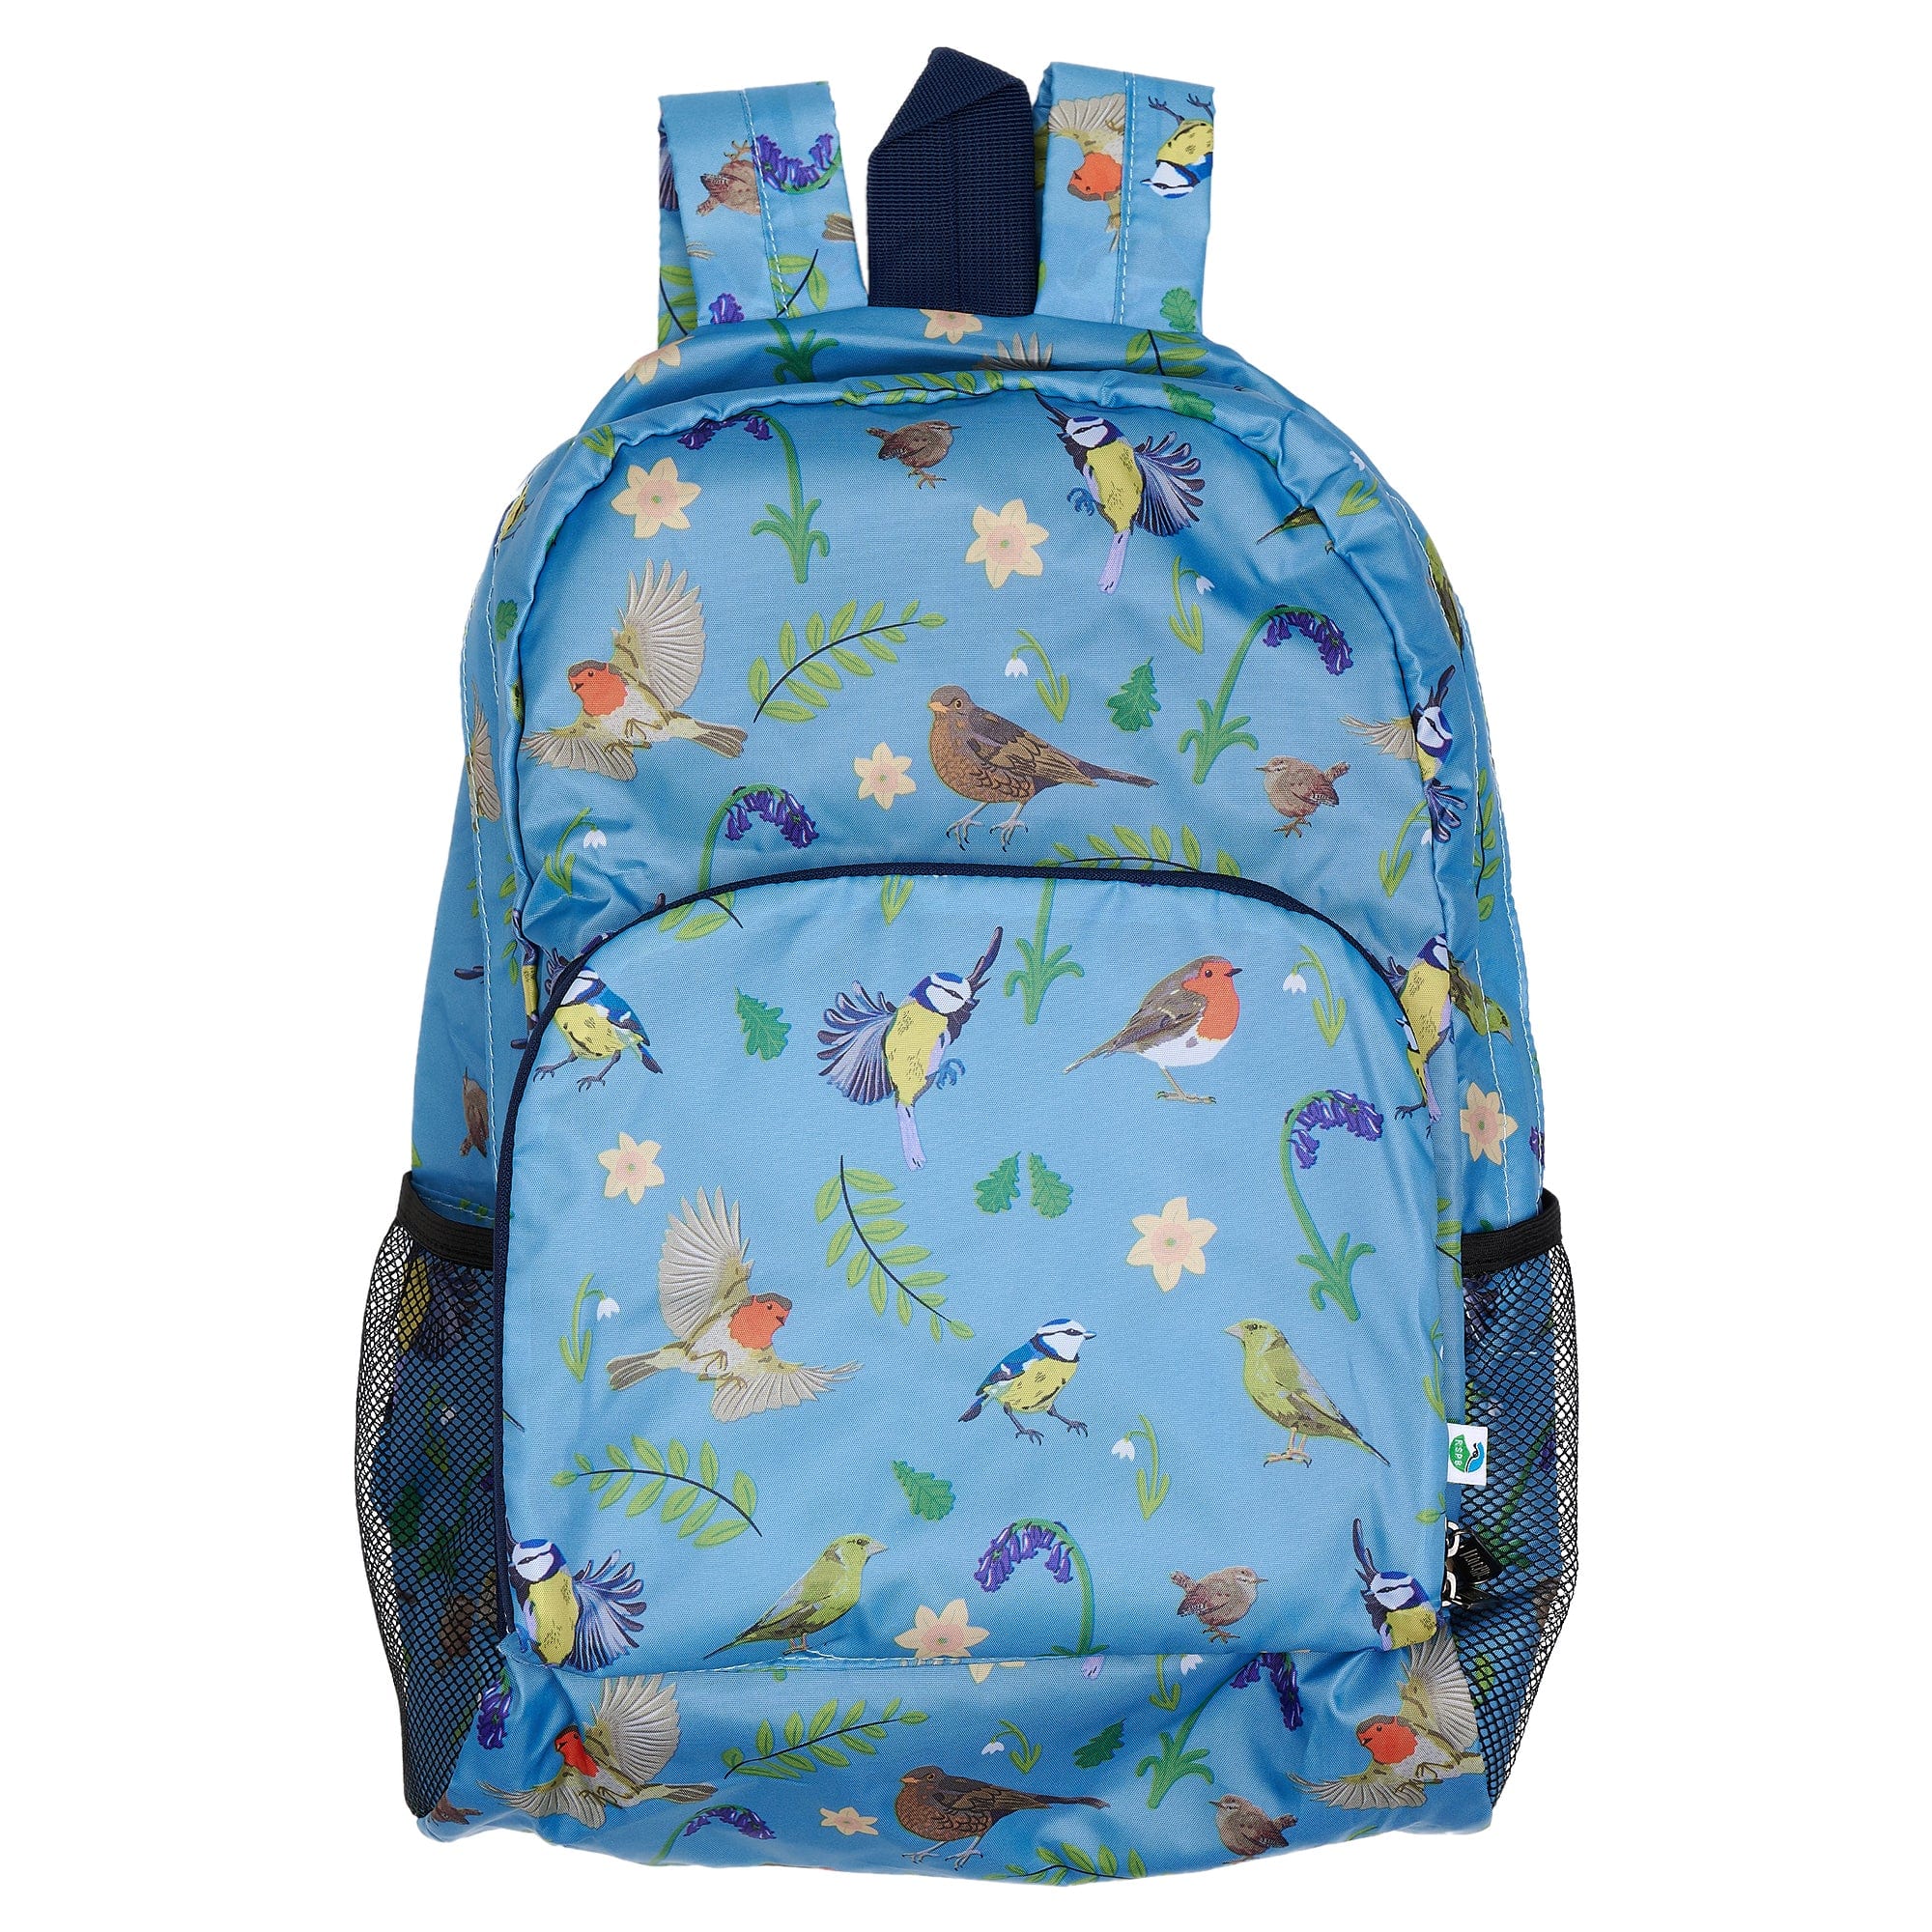 Eco Chic Blue Eco Chic Lightweight Foldable Backpack RSPB Birds